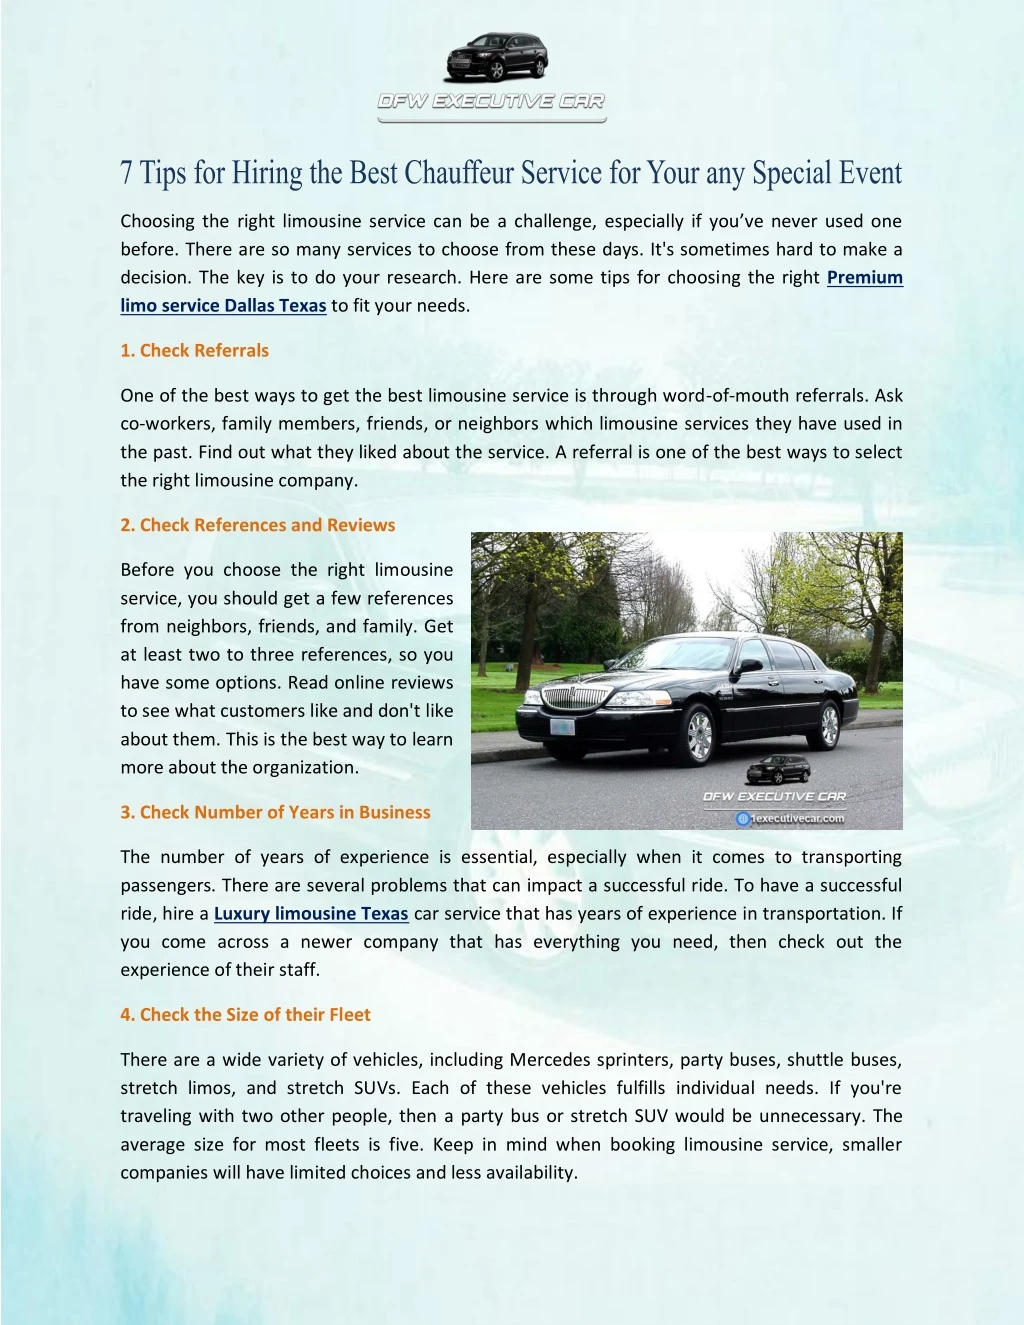 choosing the right limousine service